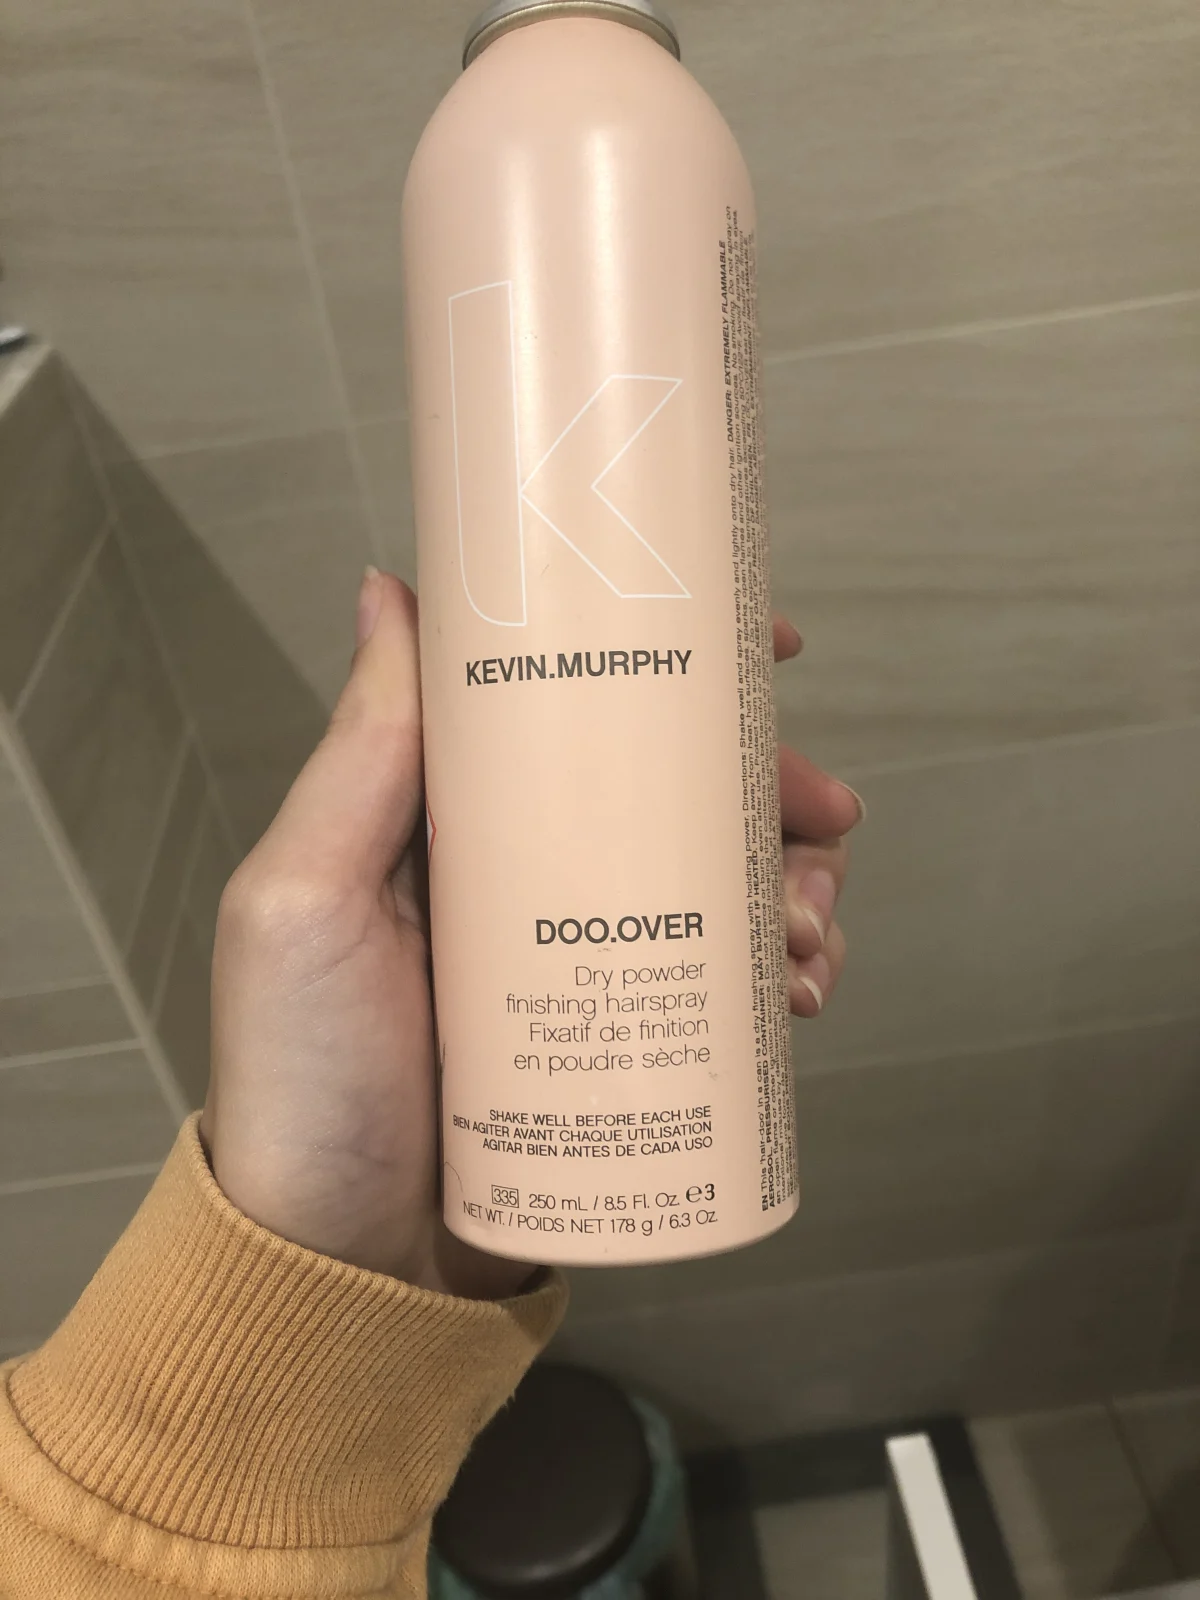 Kevin Murphy - DOO.OVER - before review image